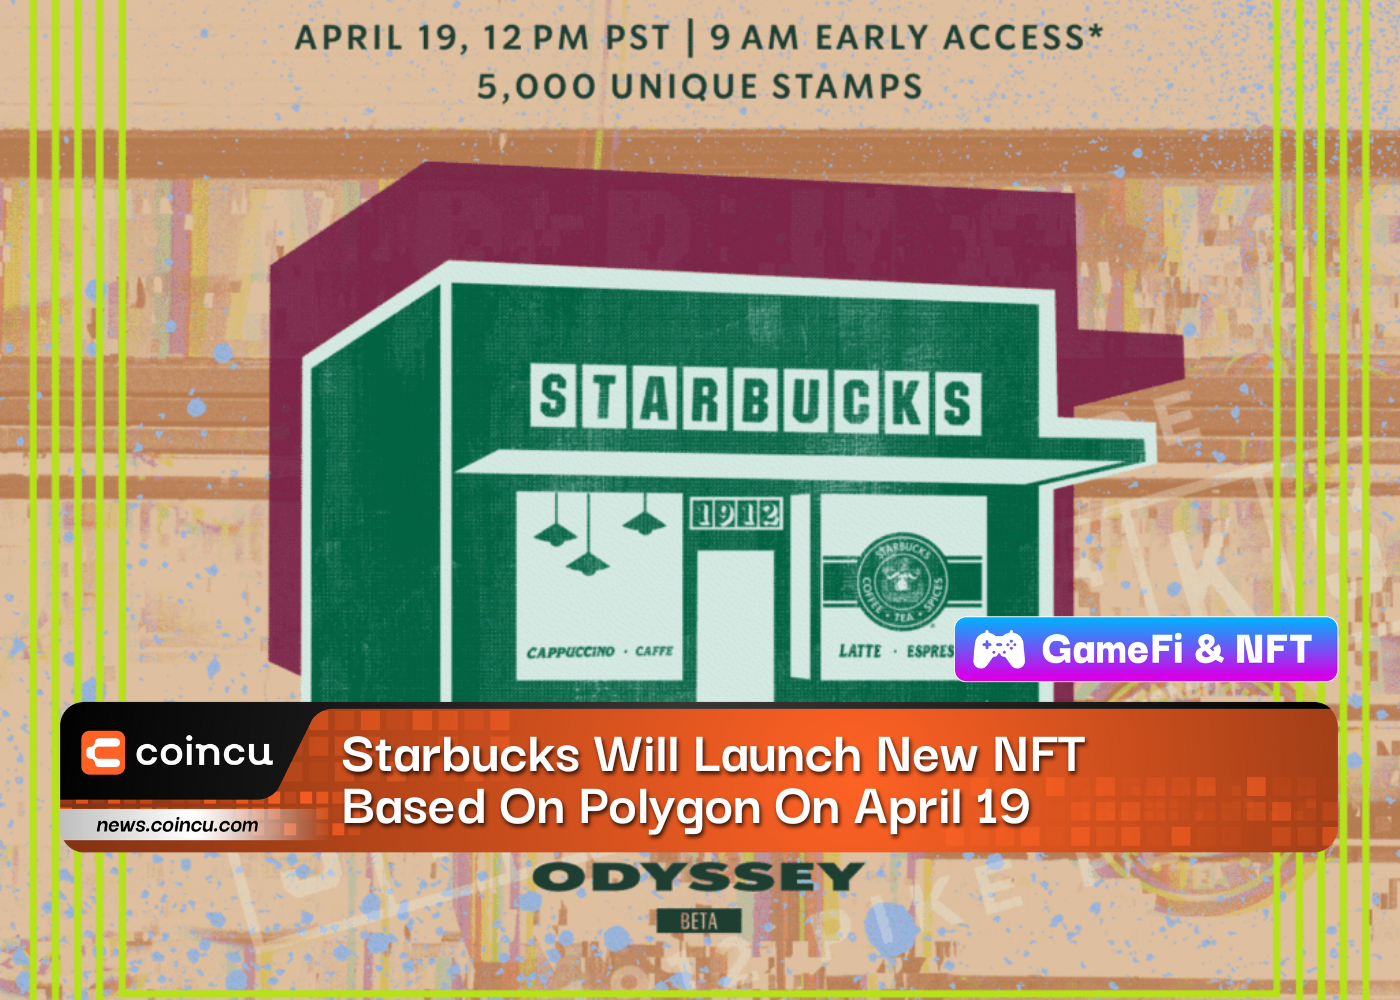 Starbucks Will Launch New NFT Based On Polygon On April 19